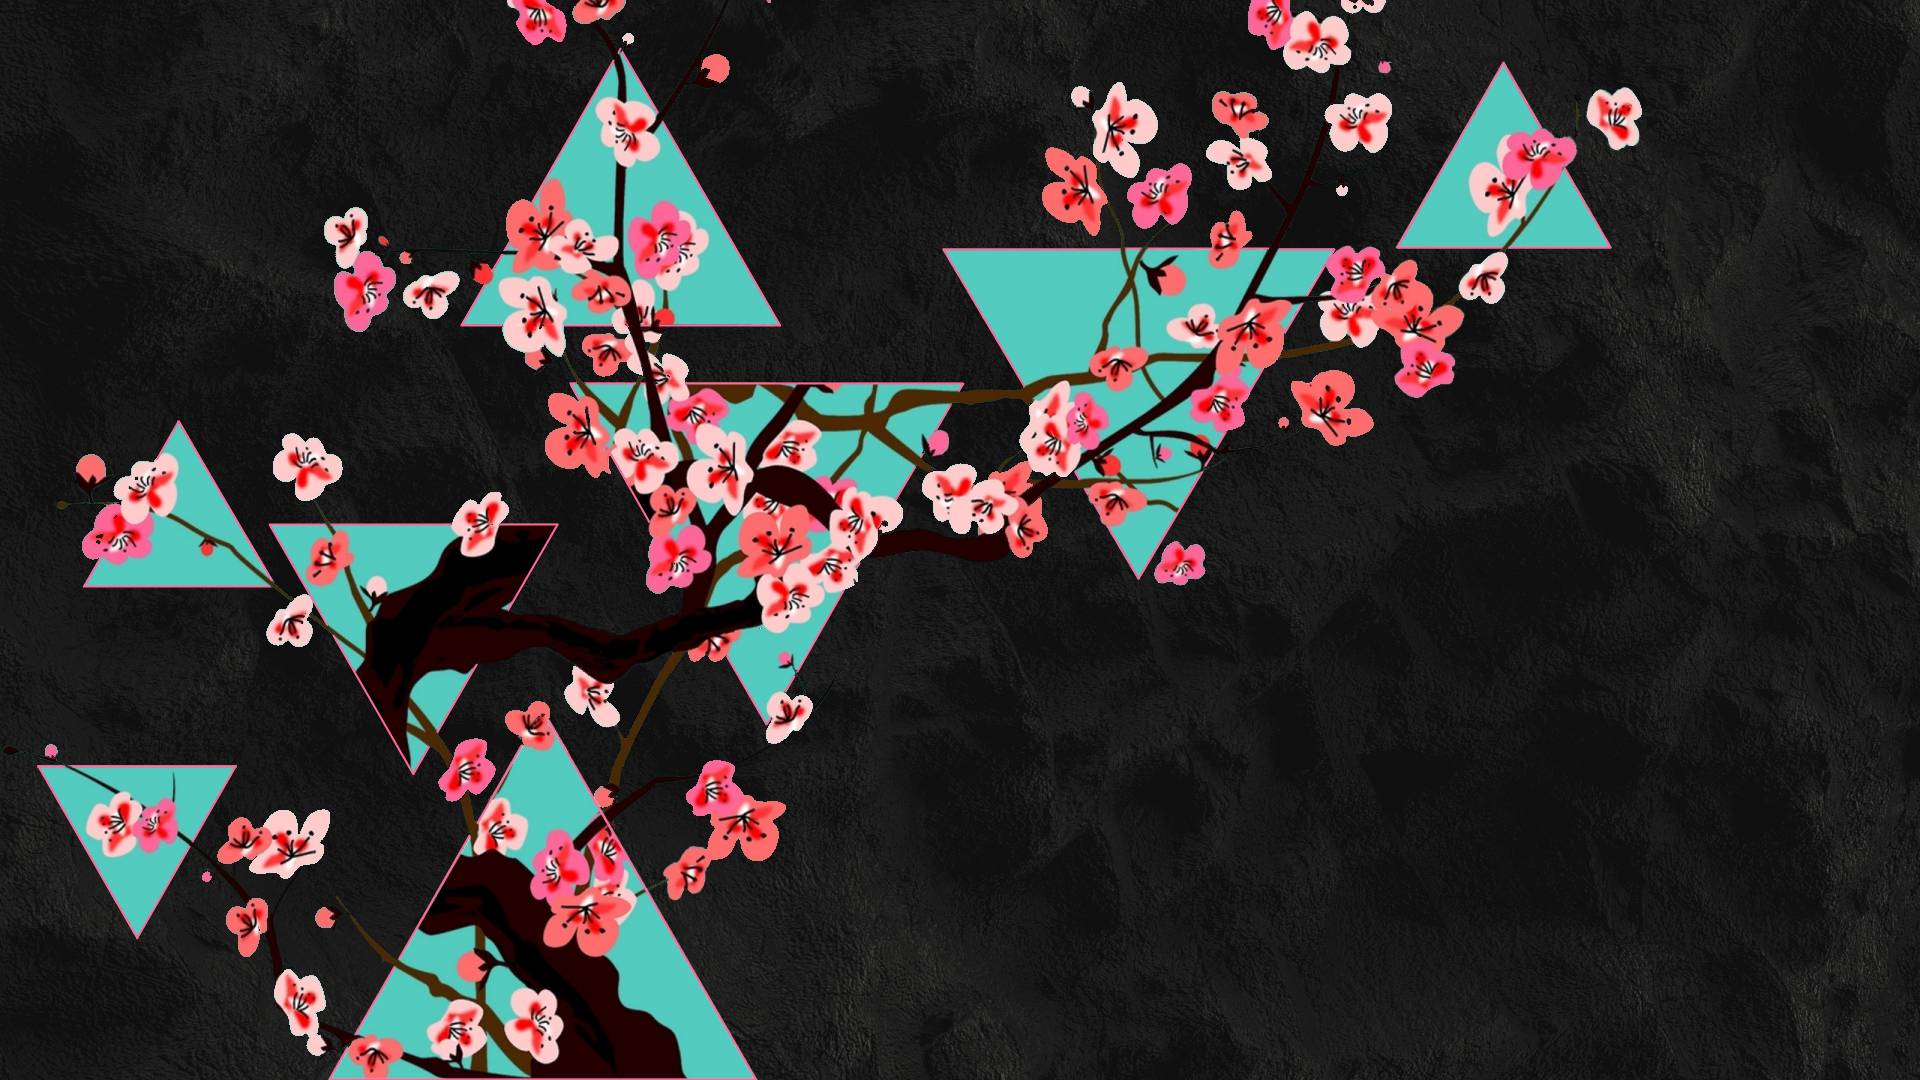 General 1920x1080 cherry blossom triangle gray background flowers abstract geometric figures